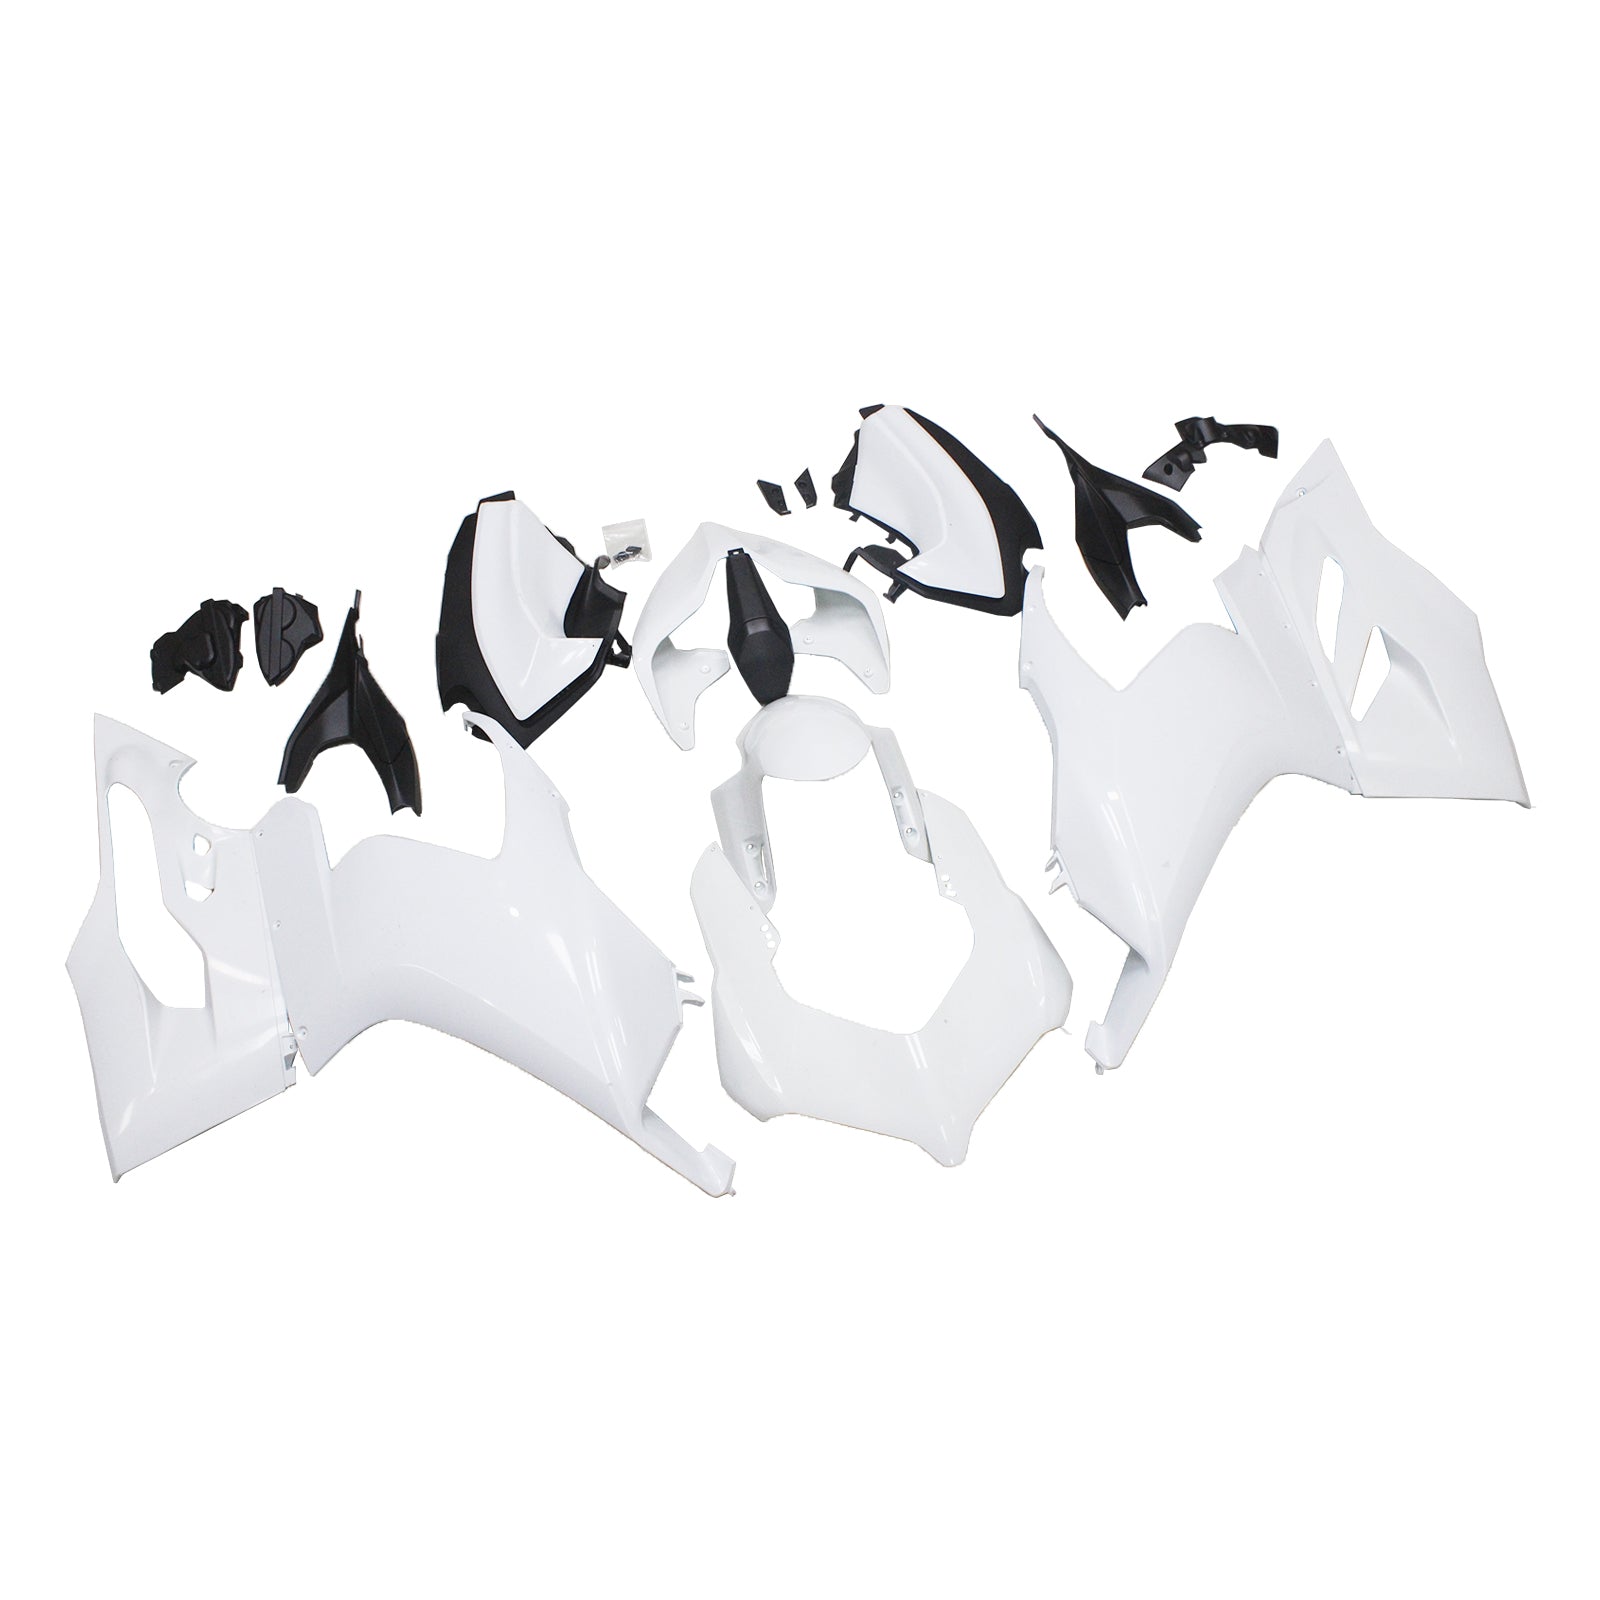 Bodywork Fairing Injection Molding Unpainted For Ducati Panigale V2 2020-2022